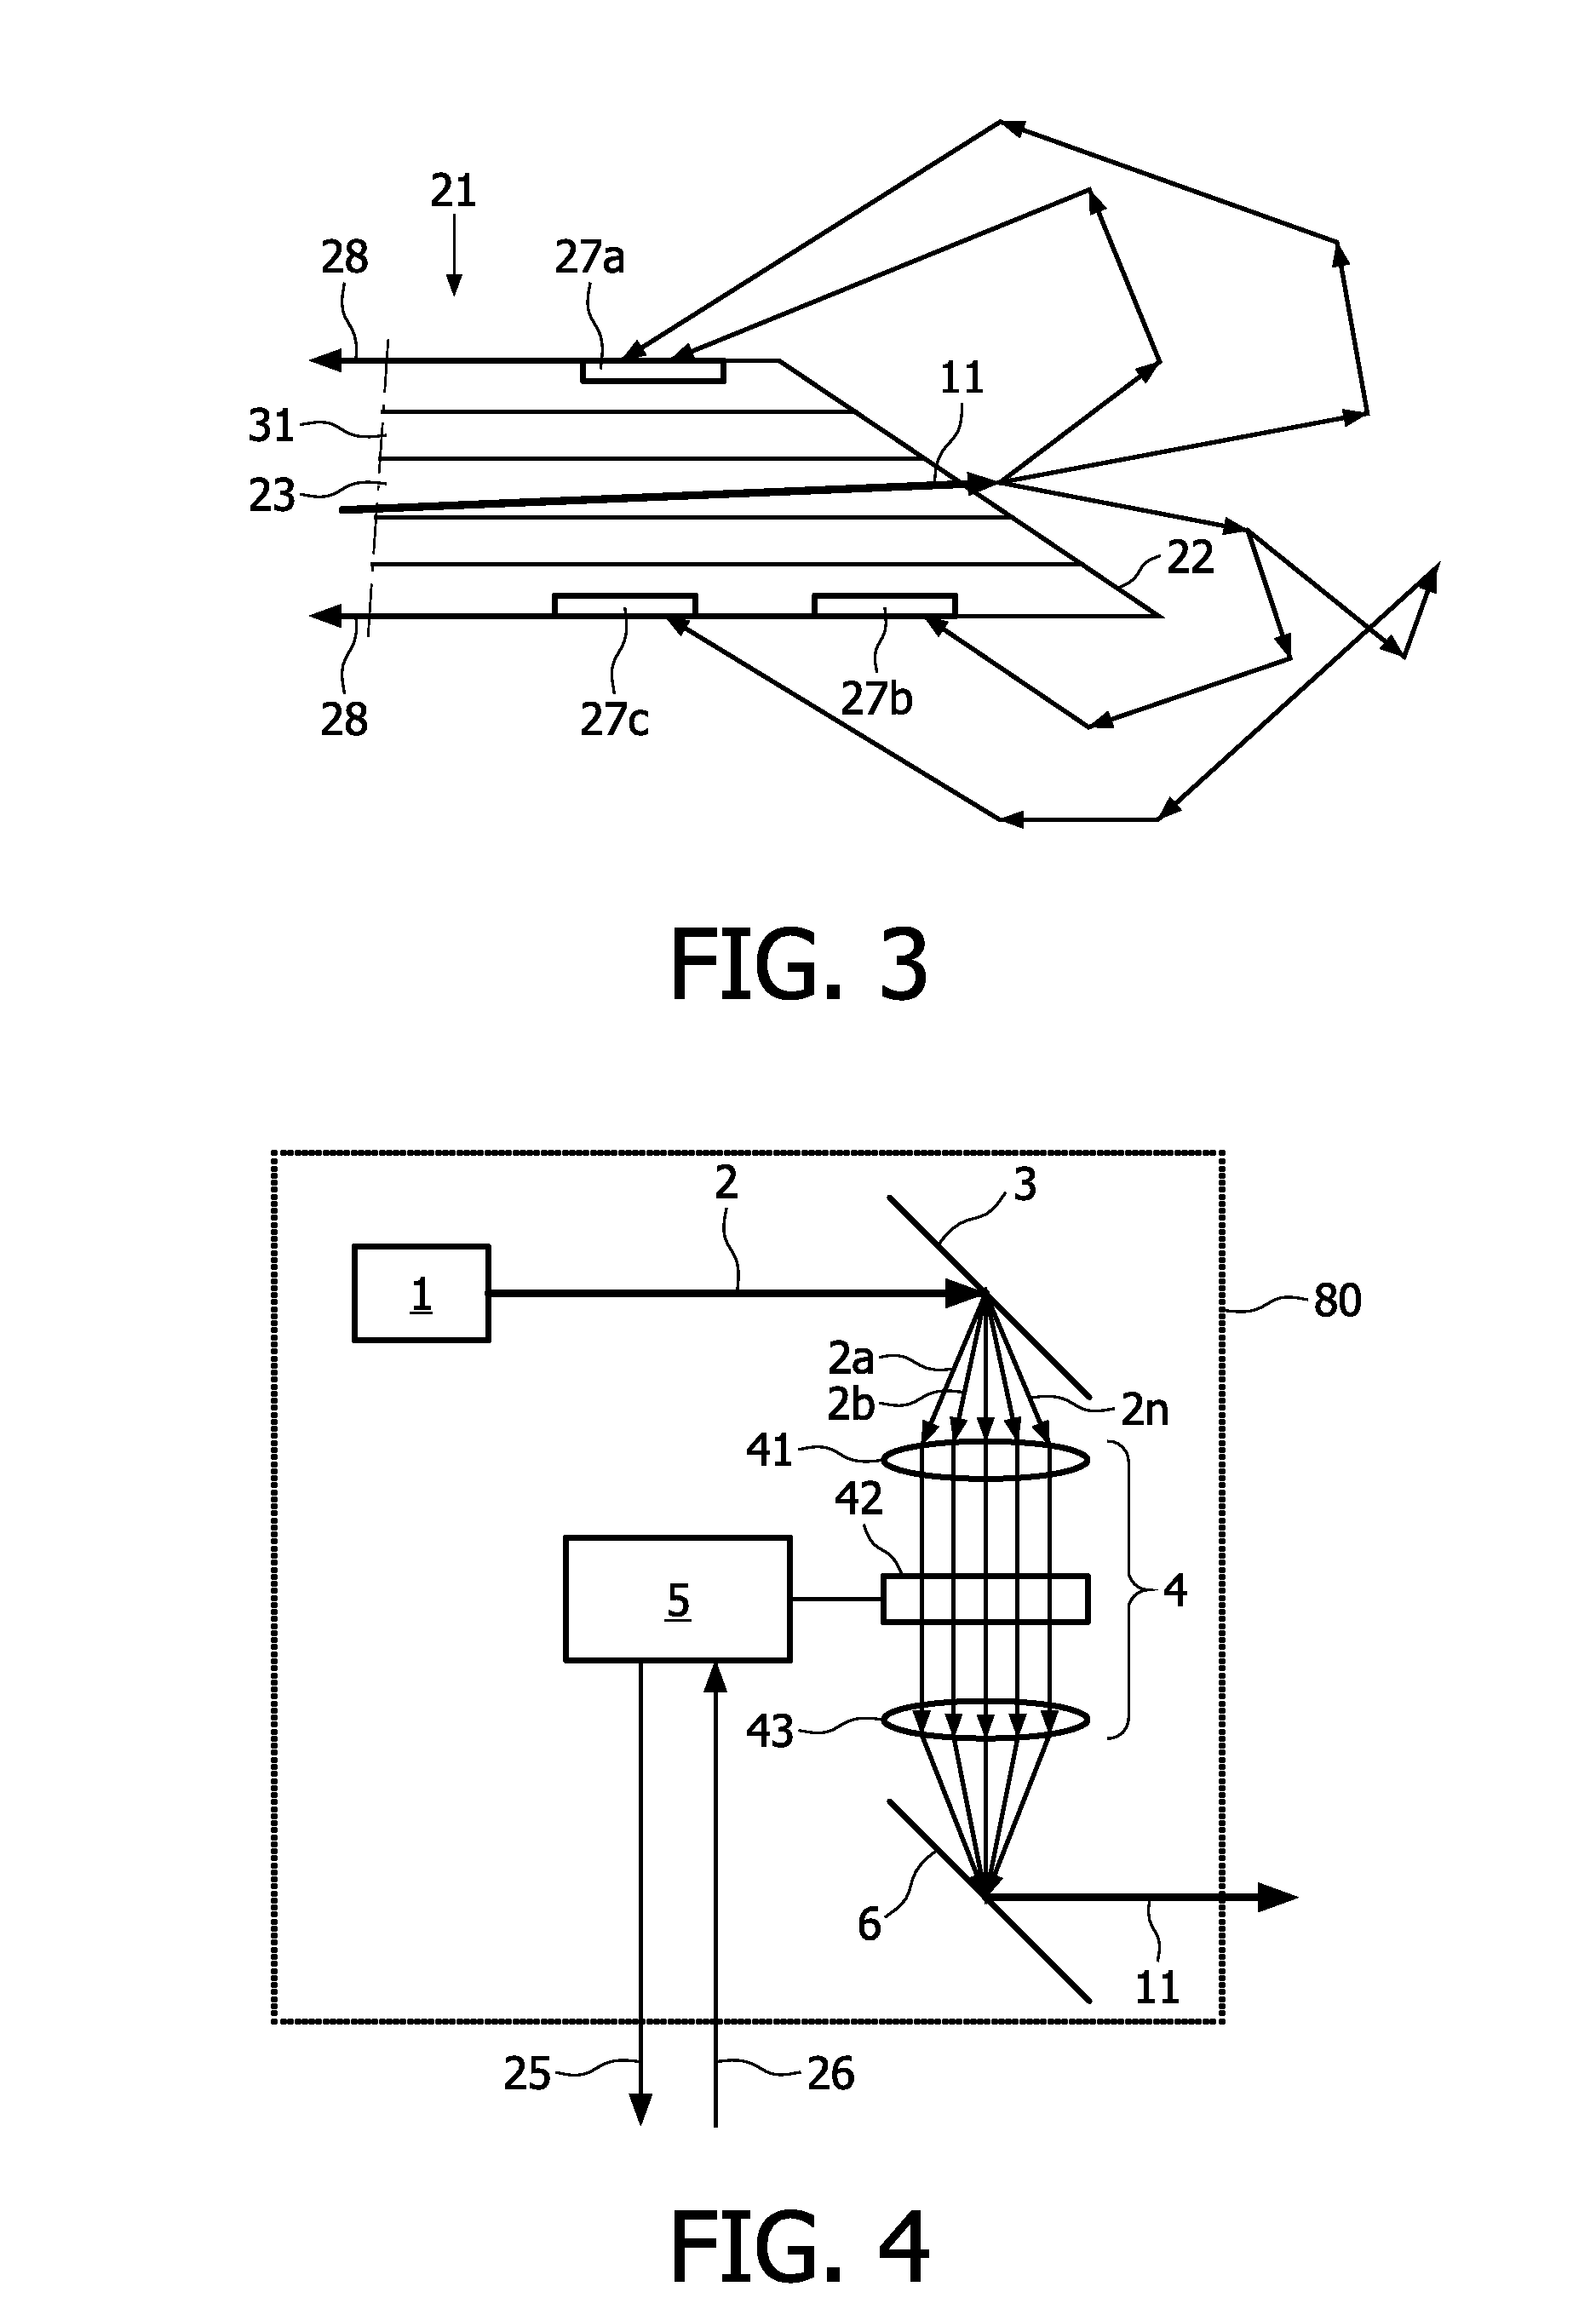 Optical examination device adapted to be at least partially inserted into a turbid medium